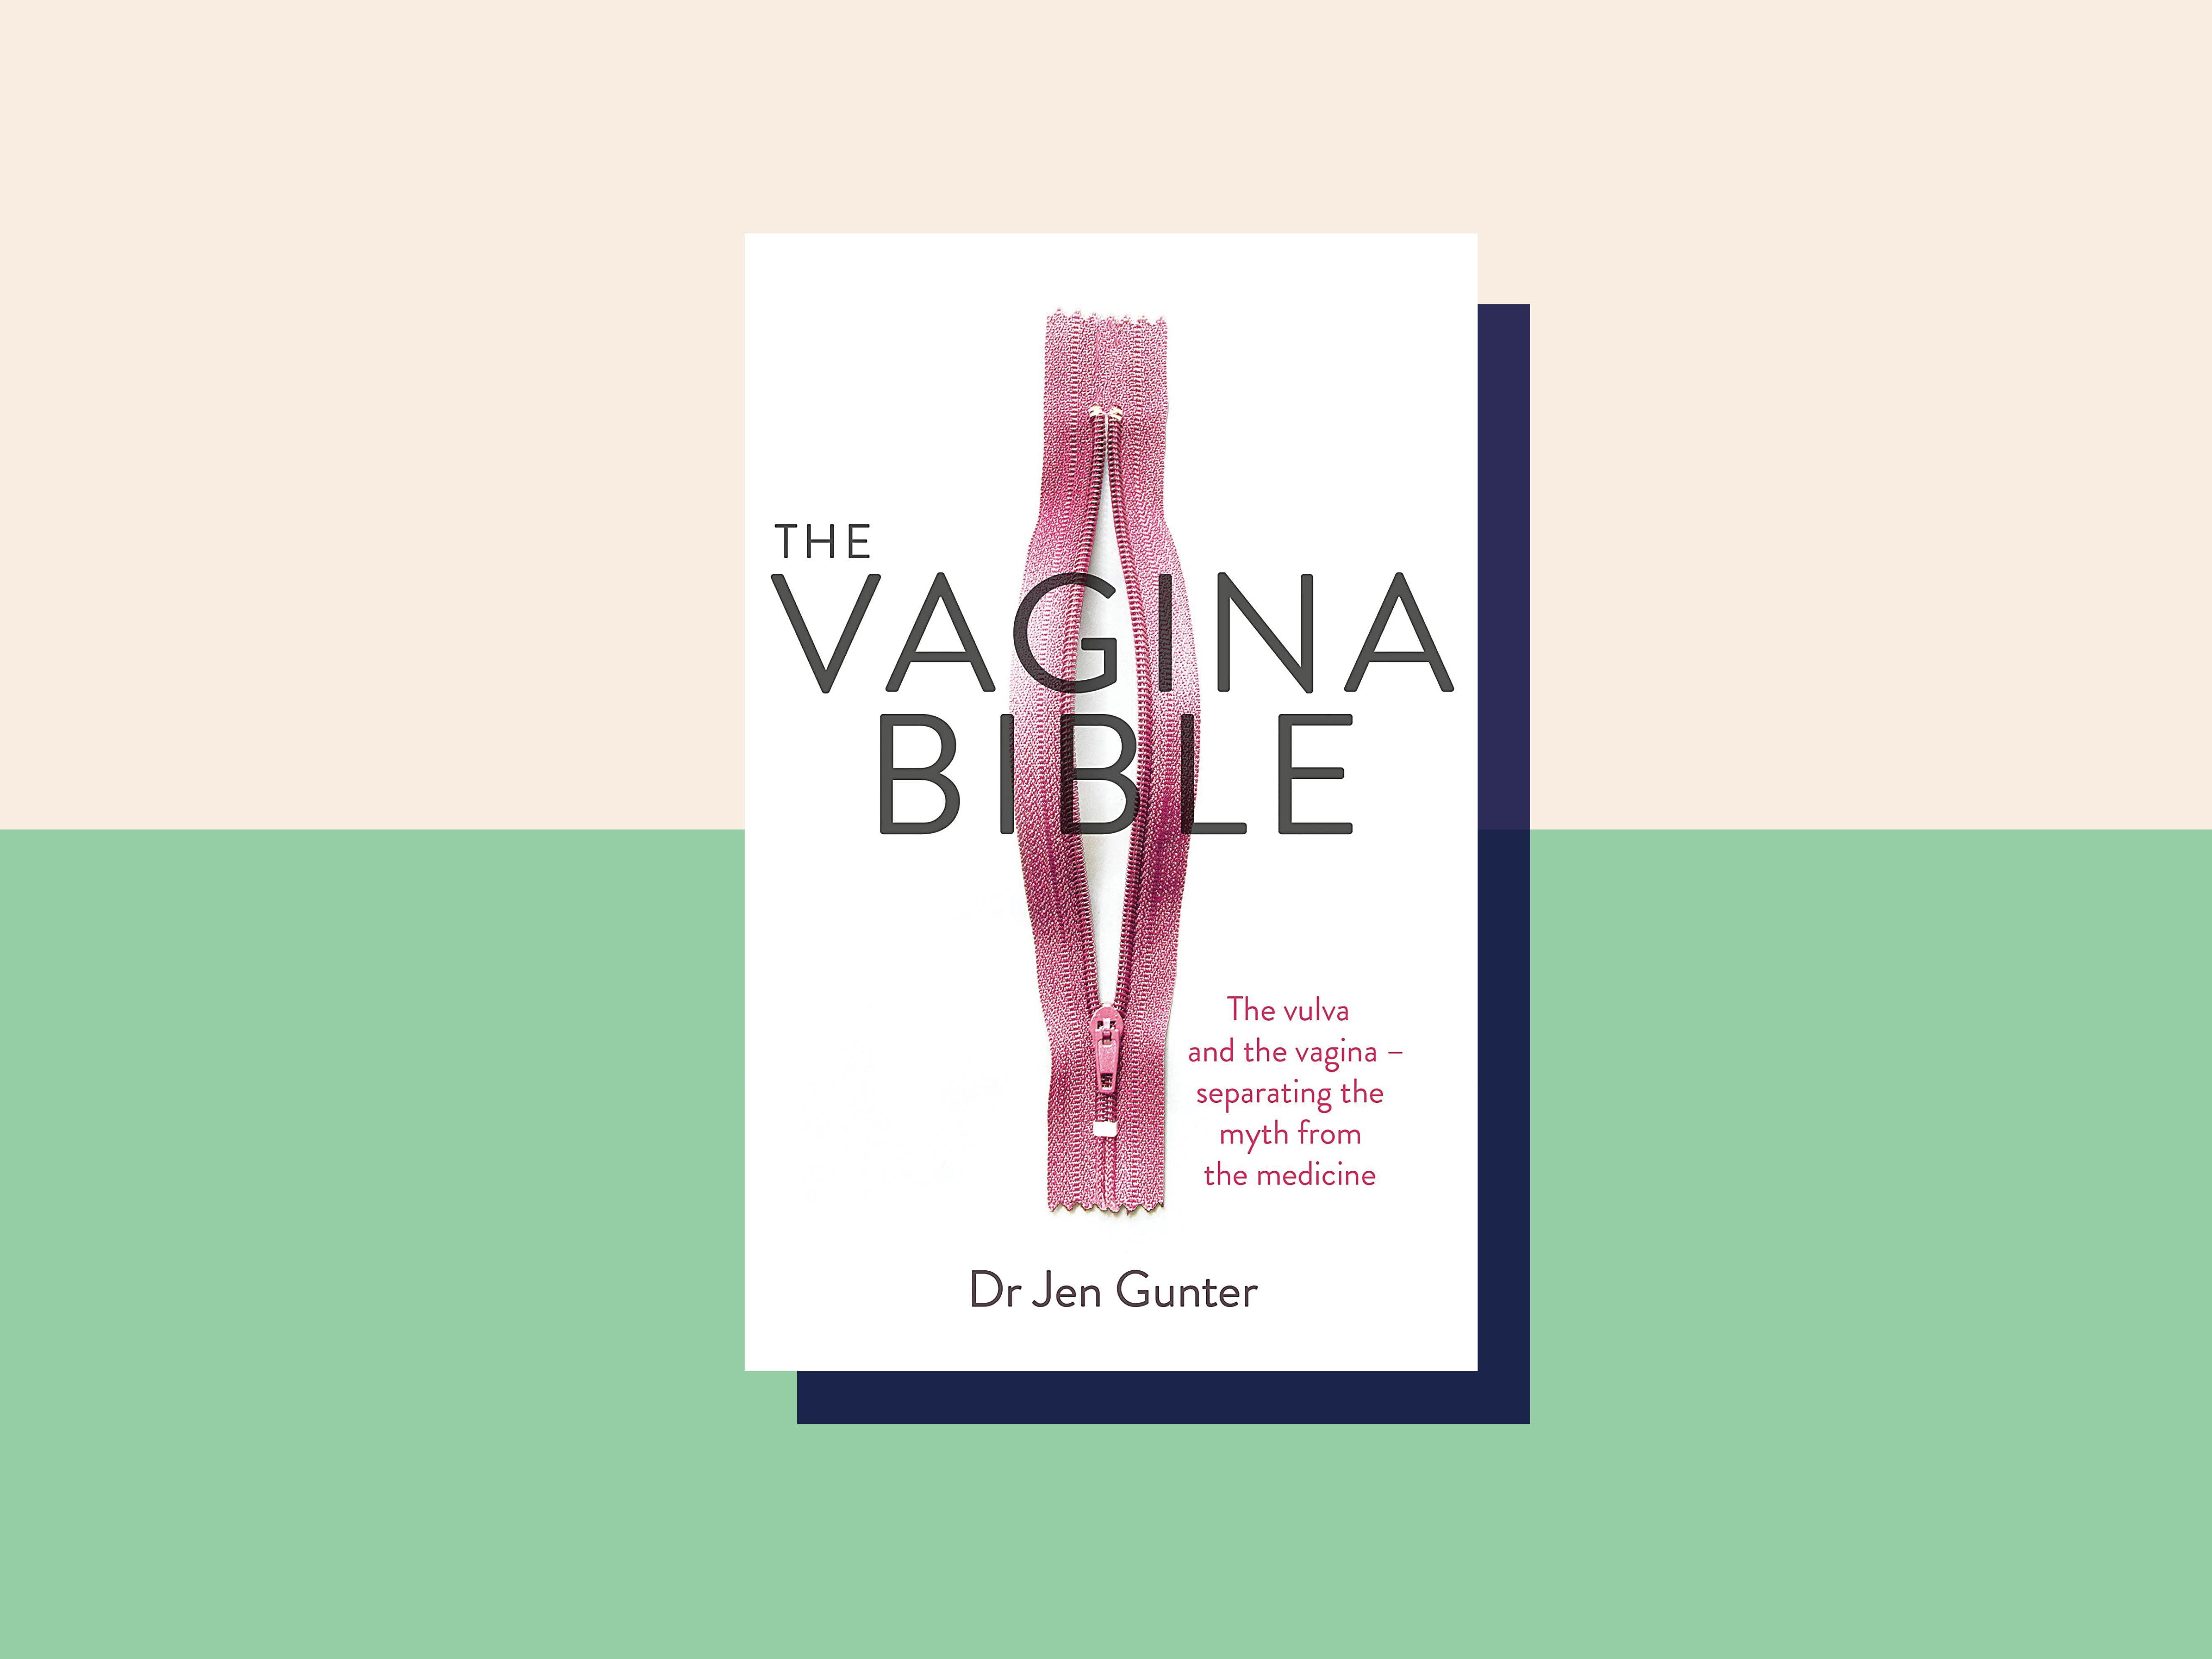 The cover of Dr. Jen Gunter's book, The Vagina Bible, in front of a green and beige background.